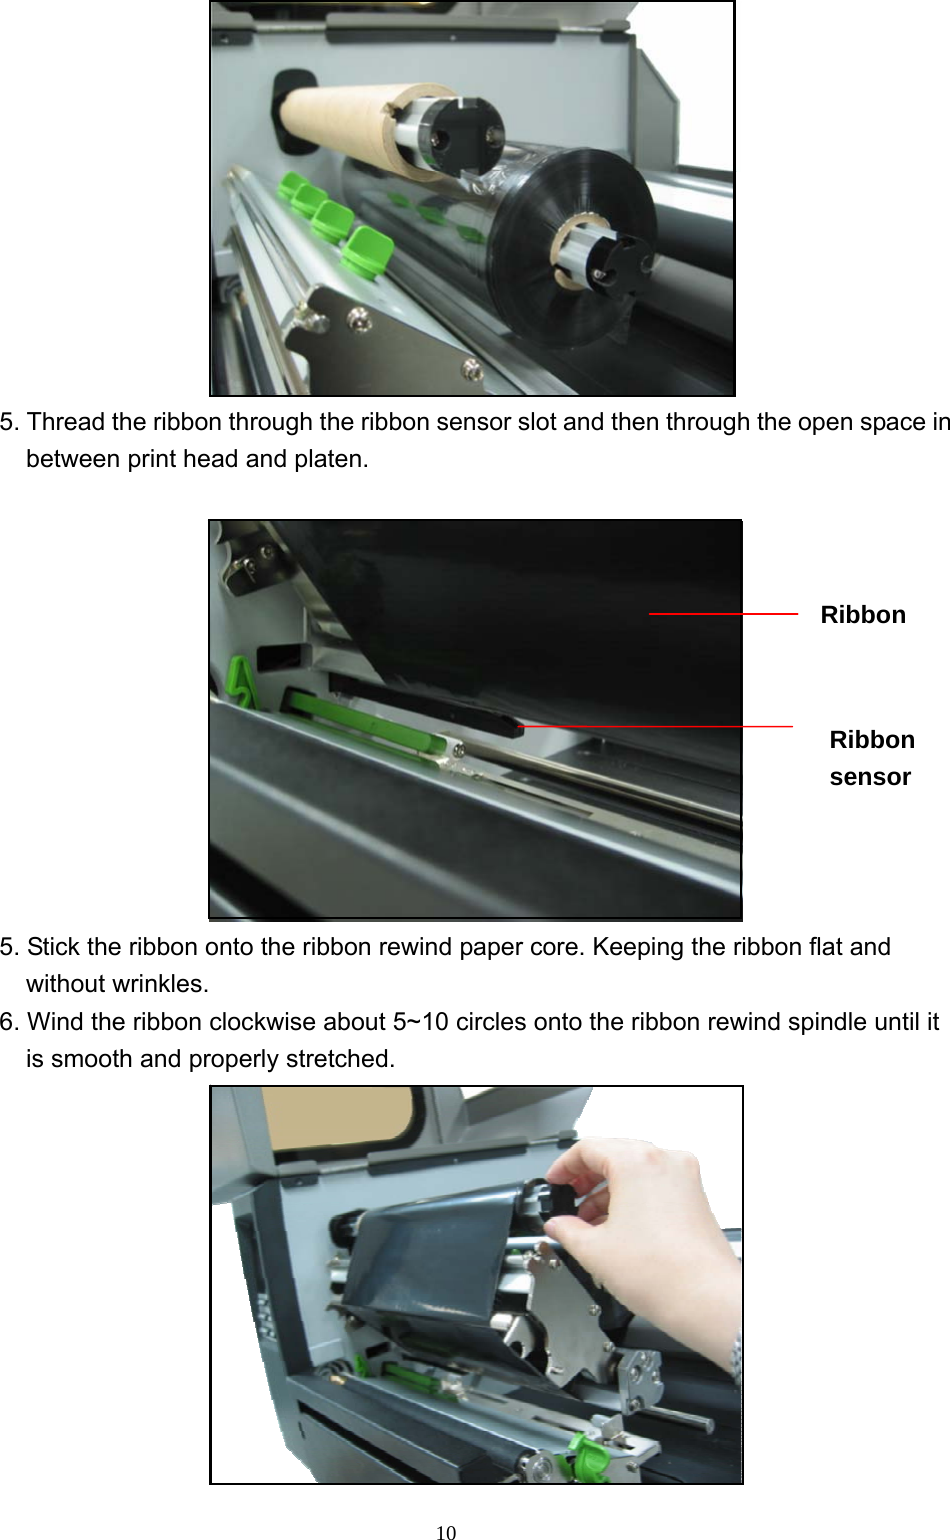  10 5. Thread the ribbon through the ribbon sensor slot and then through the open space in between print head and platen.   5. Stick the ribbon onto the ribbon rewind paper core. Keeping the ribbon flat and without wrinkles. 6. Wind the ribbon clockwise about 5~10 circles onto the ribbon rewind spindle until it is smooth and properly stretched.  Ribbon sensor Ribbon   